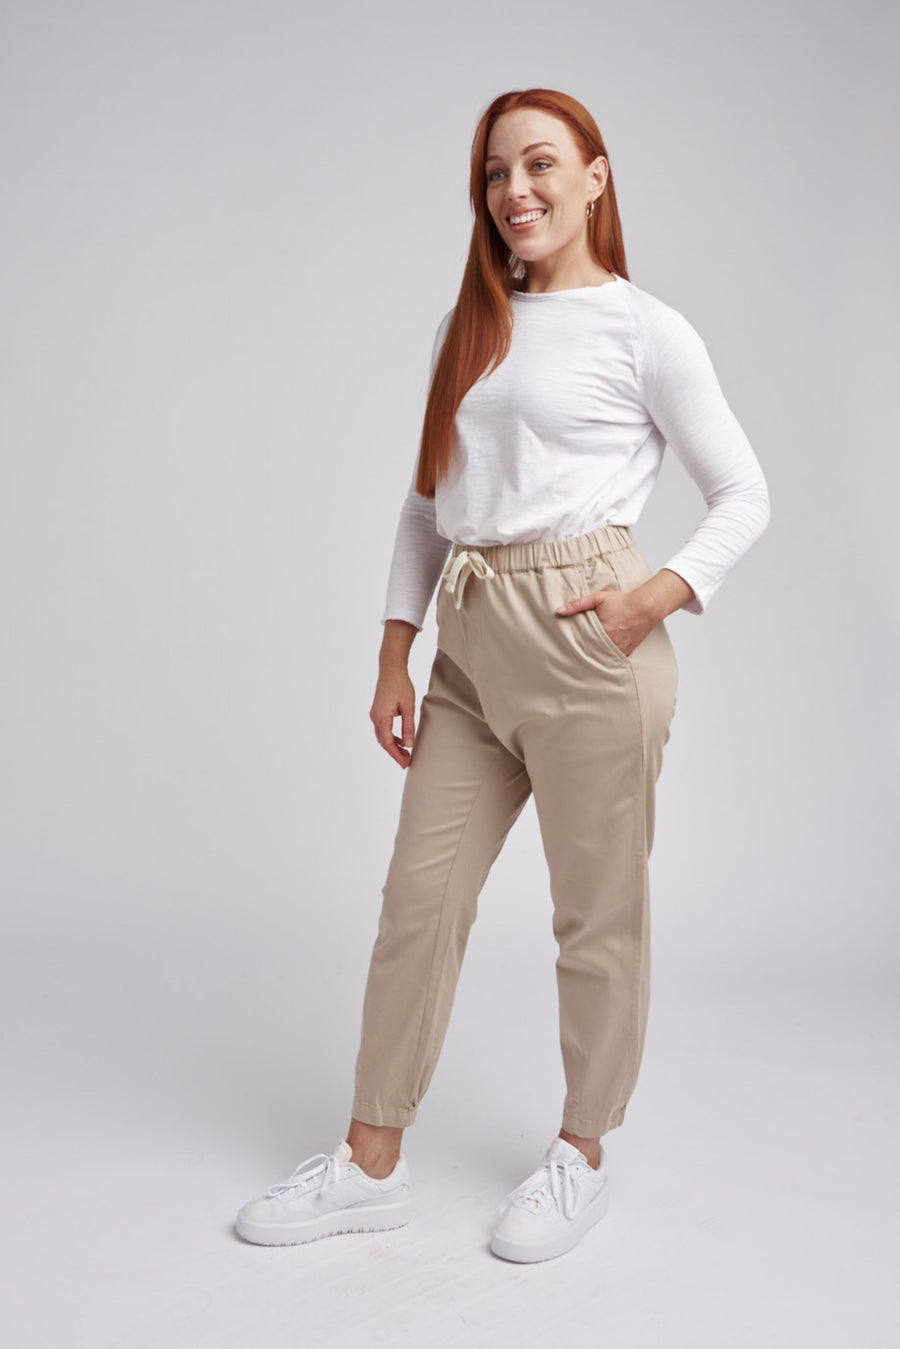 Cloth + Paper + Scissors - Casual Tapered Leg Pant - Taupe